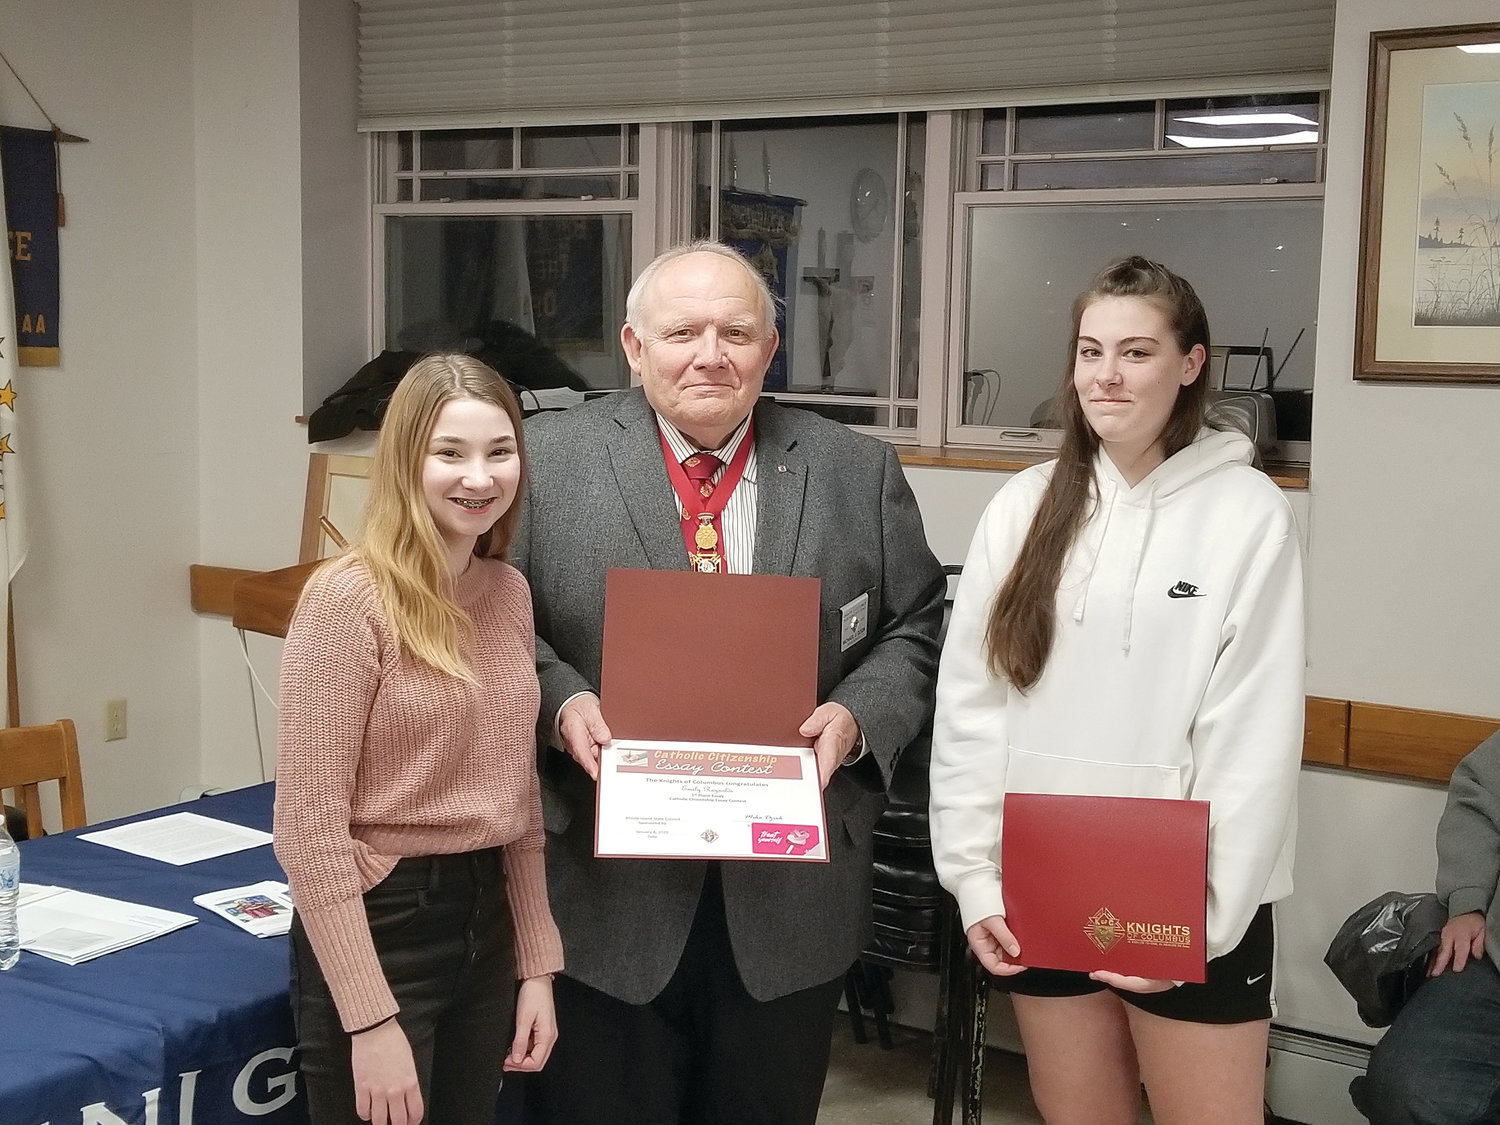 Knights of Columbus State Deputy Grand Knight Mike Dziok presents award certificates to Emily Reynolds and Julia Rensehausen for their submissions in the Catholic Citizenship Essay Contest. The essays have been sent to Supreme Council for judging at the International Contest level.